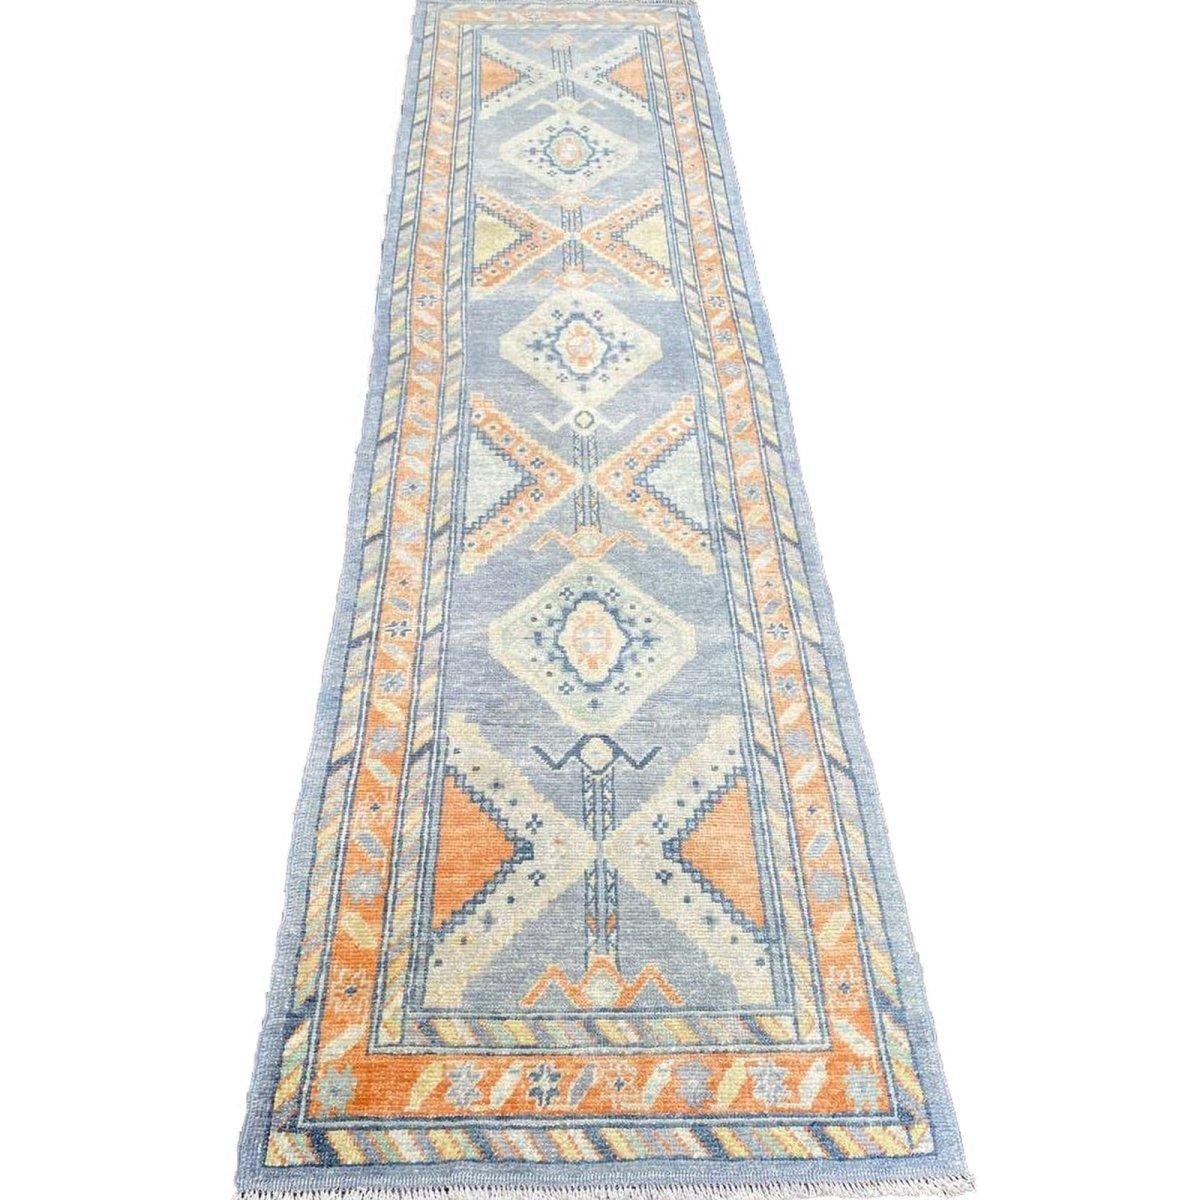 Turkish Oushak runners: Artistic narratives in narrow spaces. These intricate, elongated rugs feature Anatolian charm and vibrant patterns, adding cultural richness and style to hallways and entryways

Exact Size: 2'11